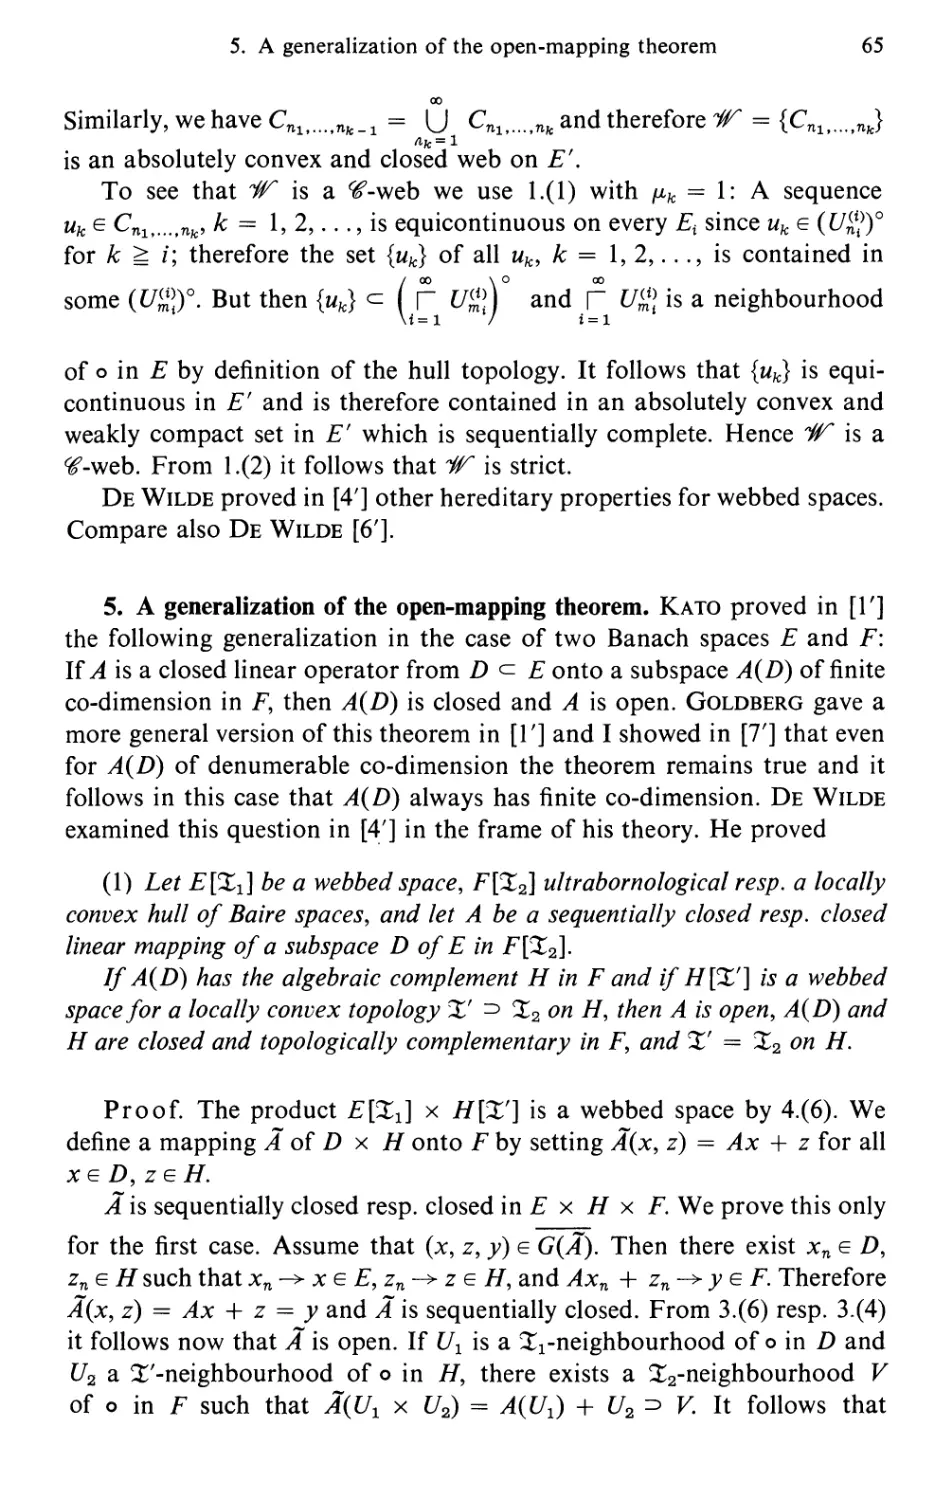 5. A generalization of the open-mapping theorem